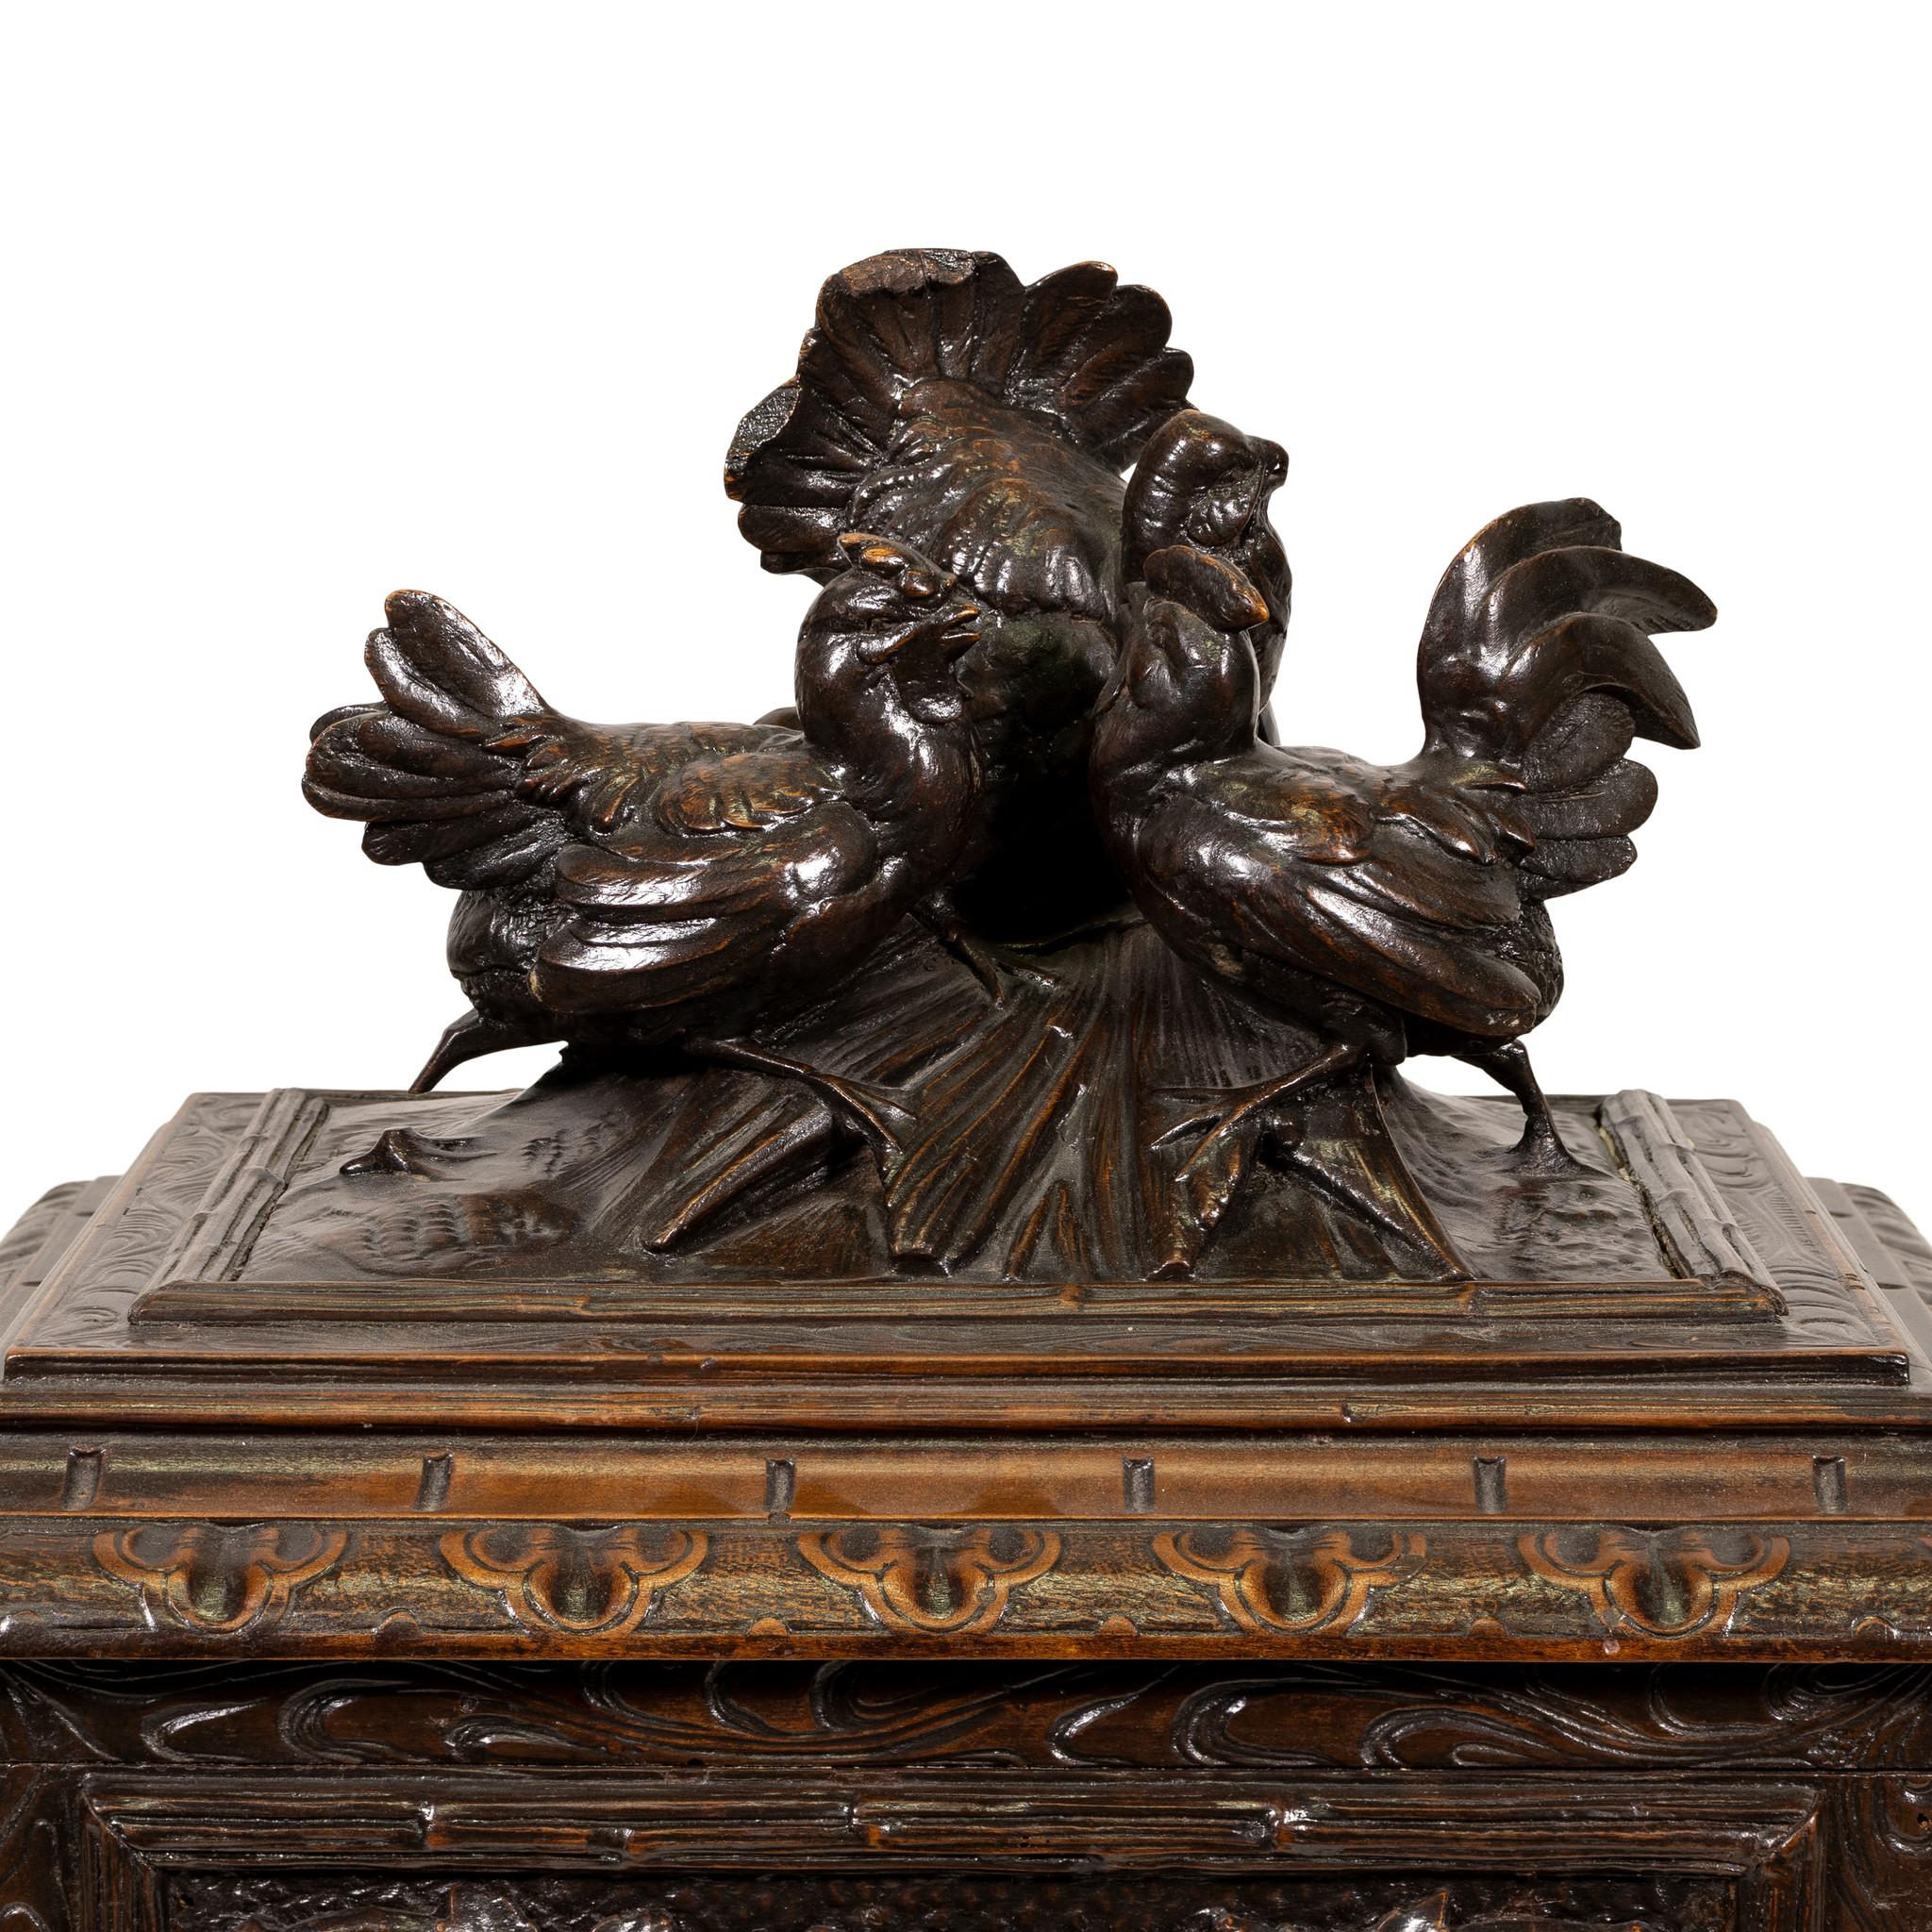 Heavily carved container with grape vines and grapes on sides and two game birds with strutting gobler as finial on top. Double hinged lids, two hinged side doors. Original key. Holds ten glasses and two cruets. The serving tray is removable. Came